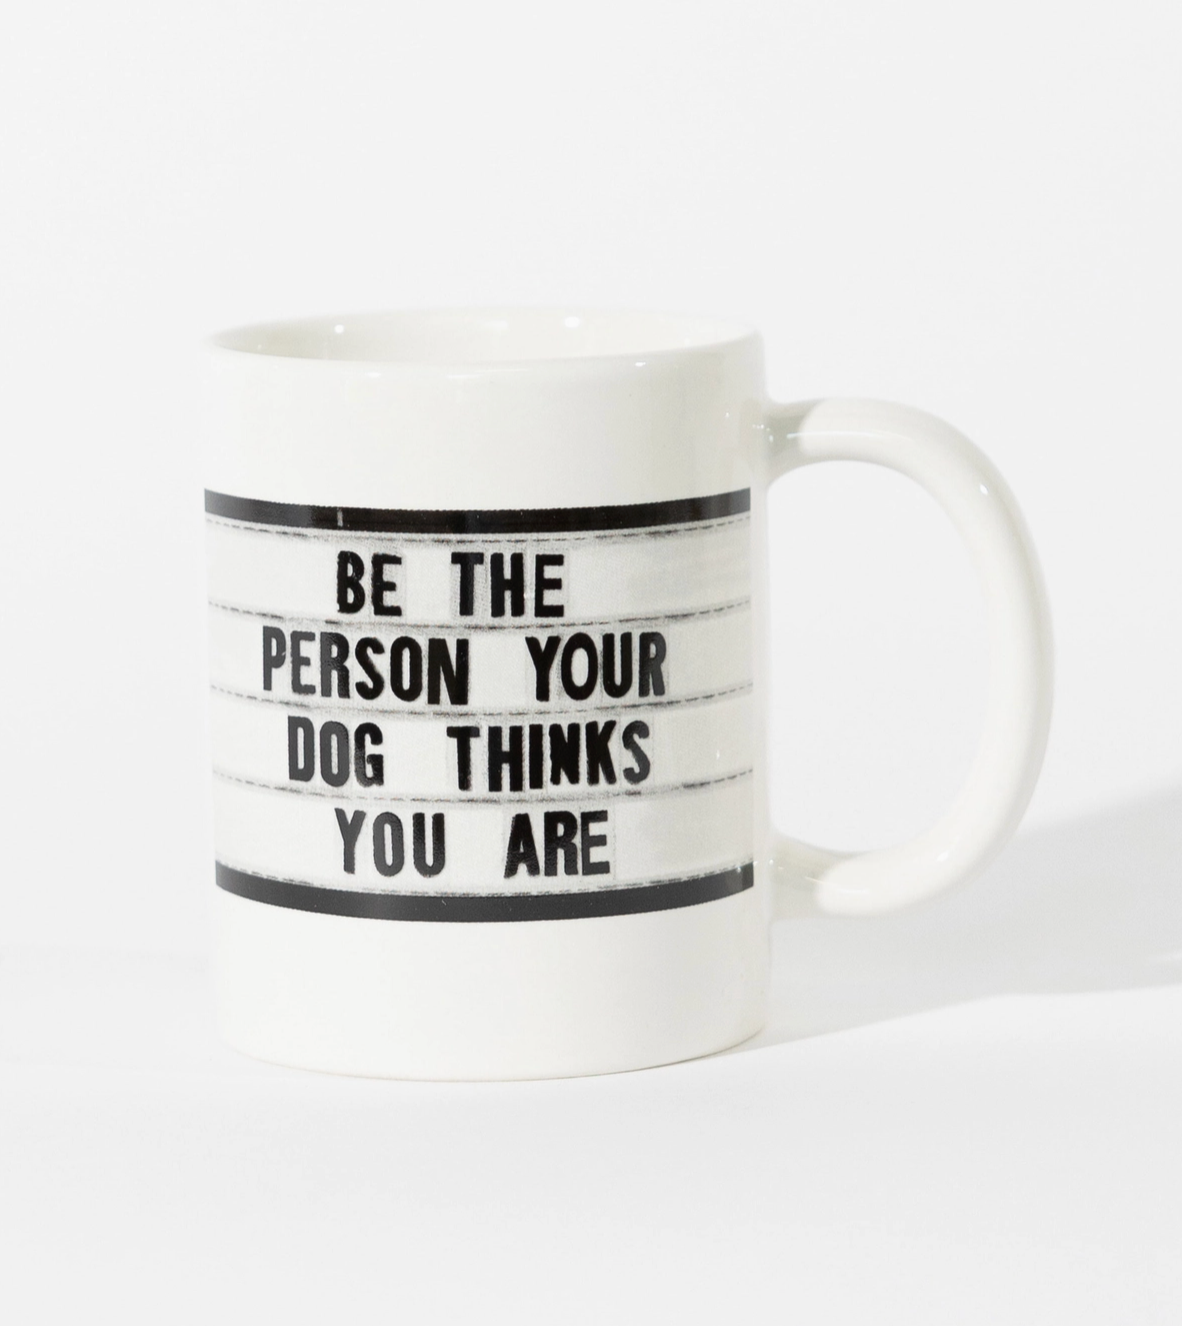 Be the person your dog thinks you are 16 oz coffee mug ceramic by El Arroyo Sold by Le Monkey House